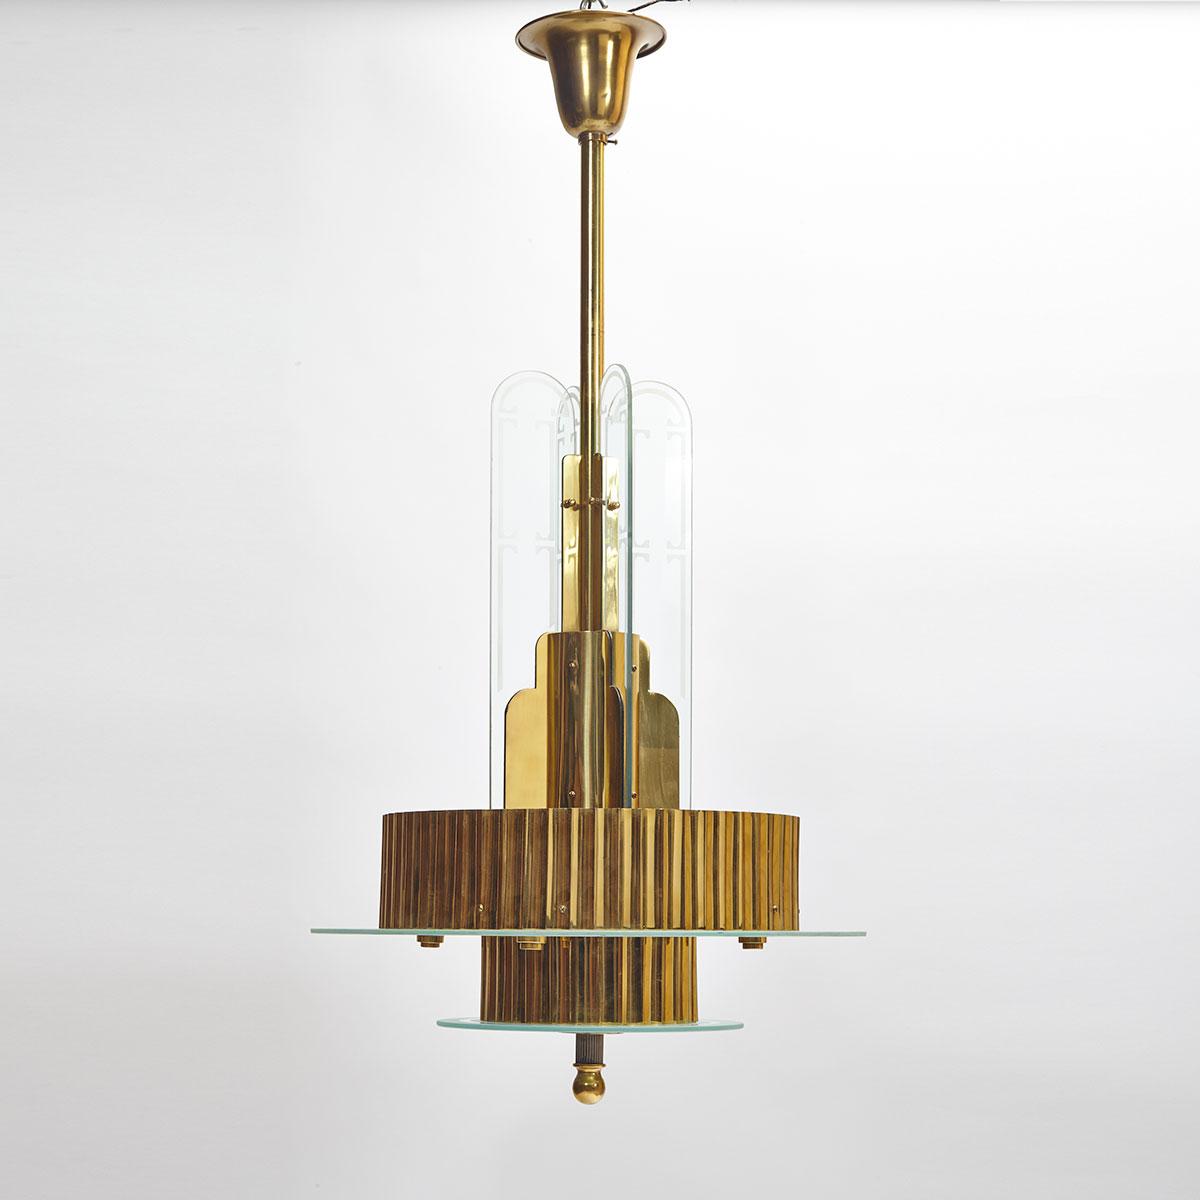 Art Deco Style Brass and Etched Glass Chandelier, mid 20th century